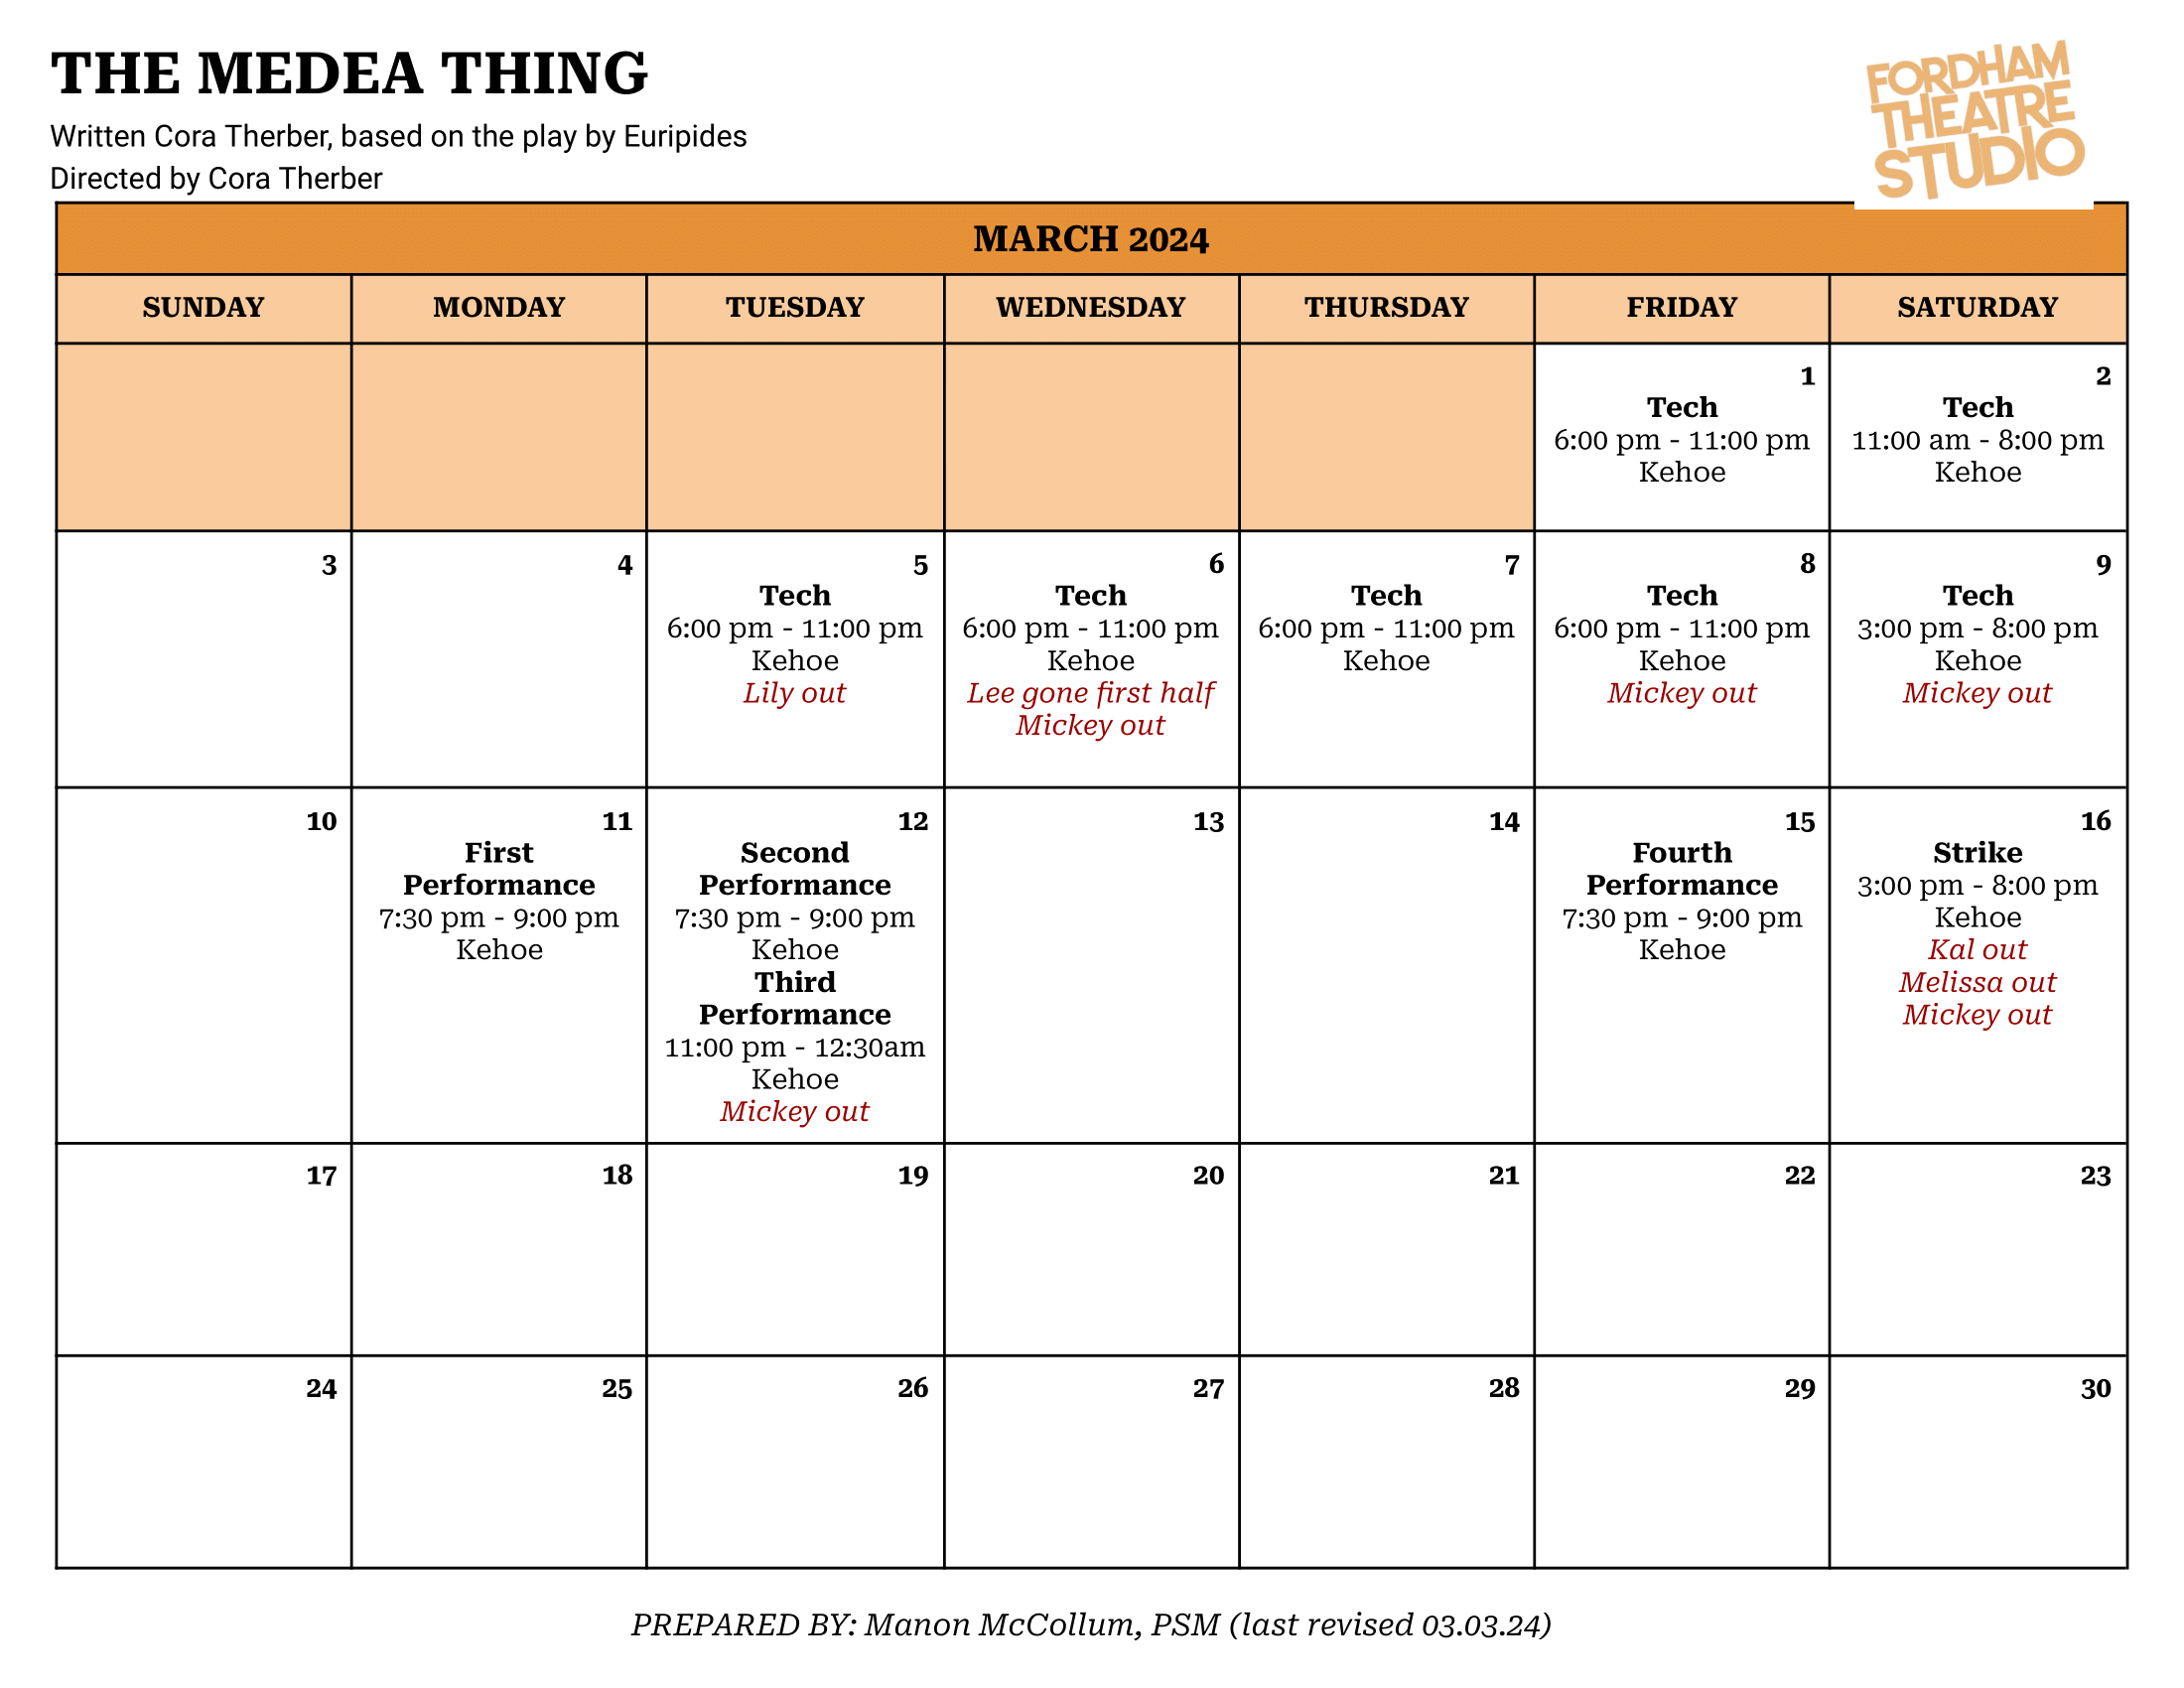 The Medea Thing Conflicts Calendar-3.png